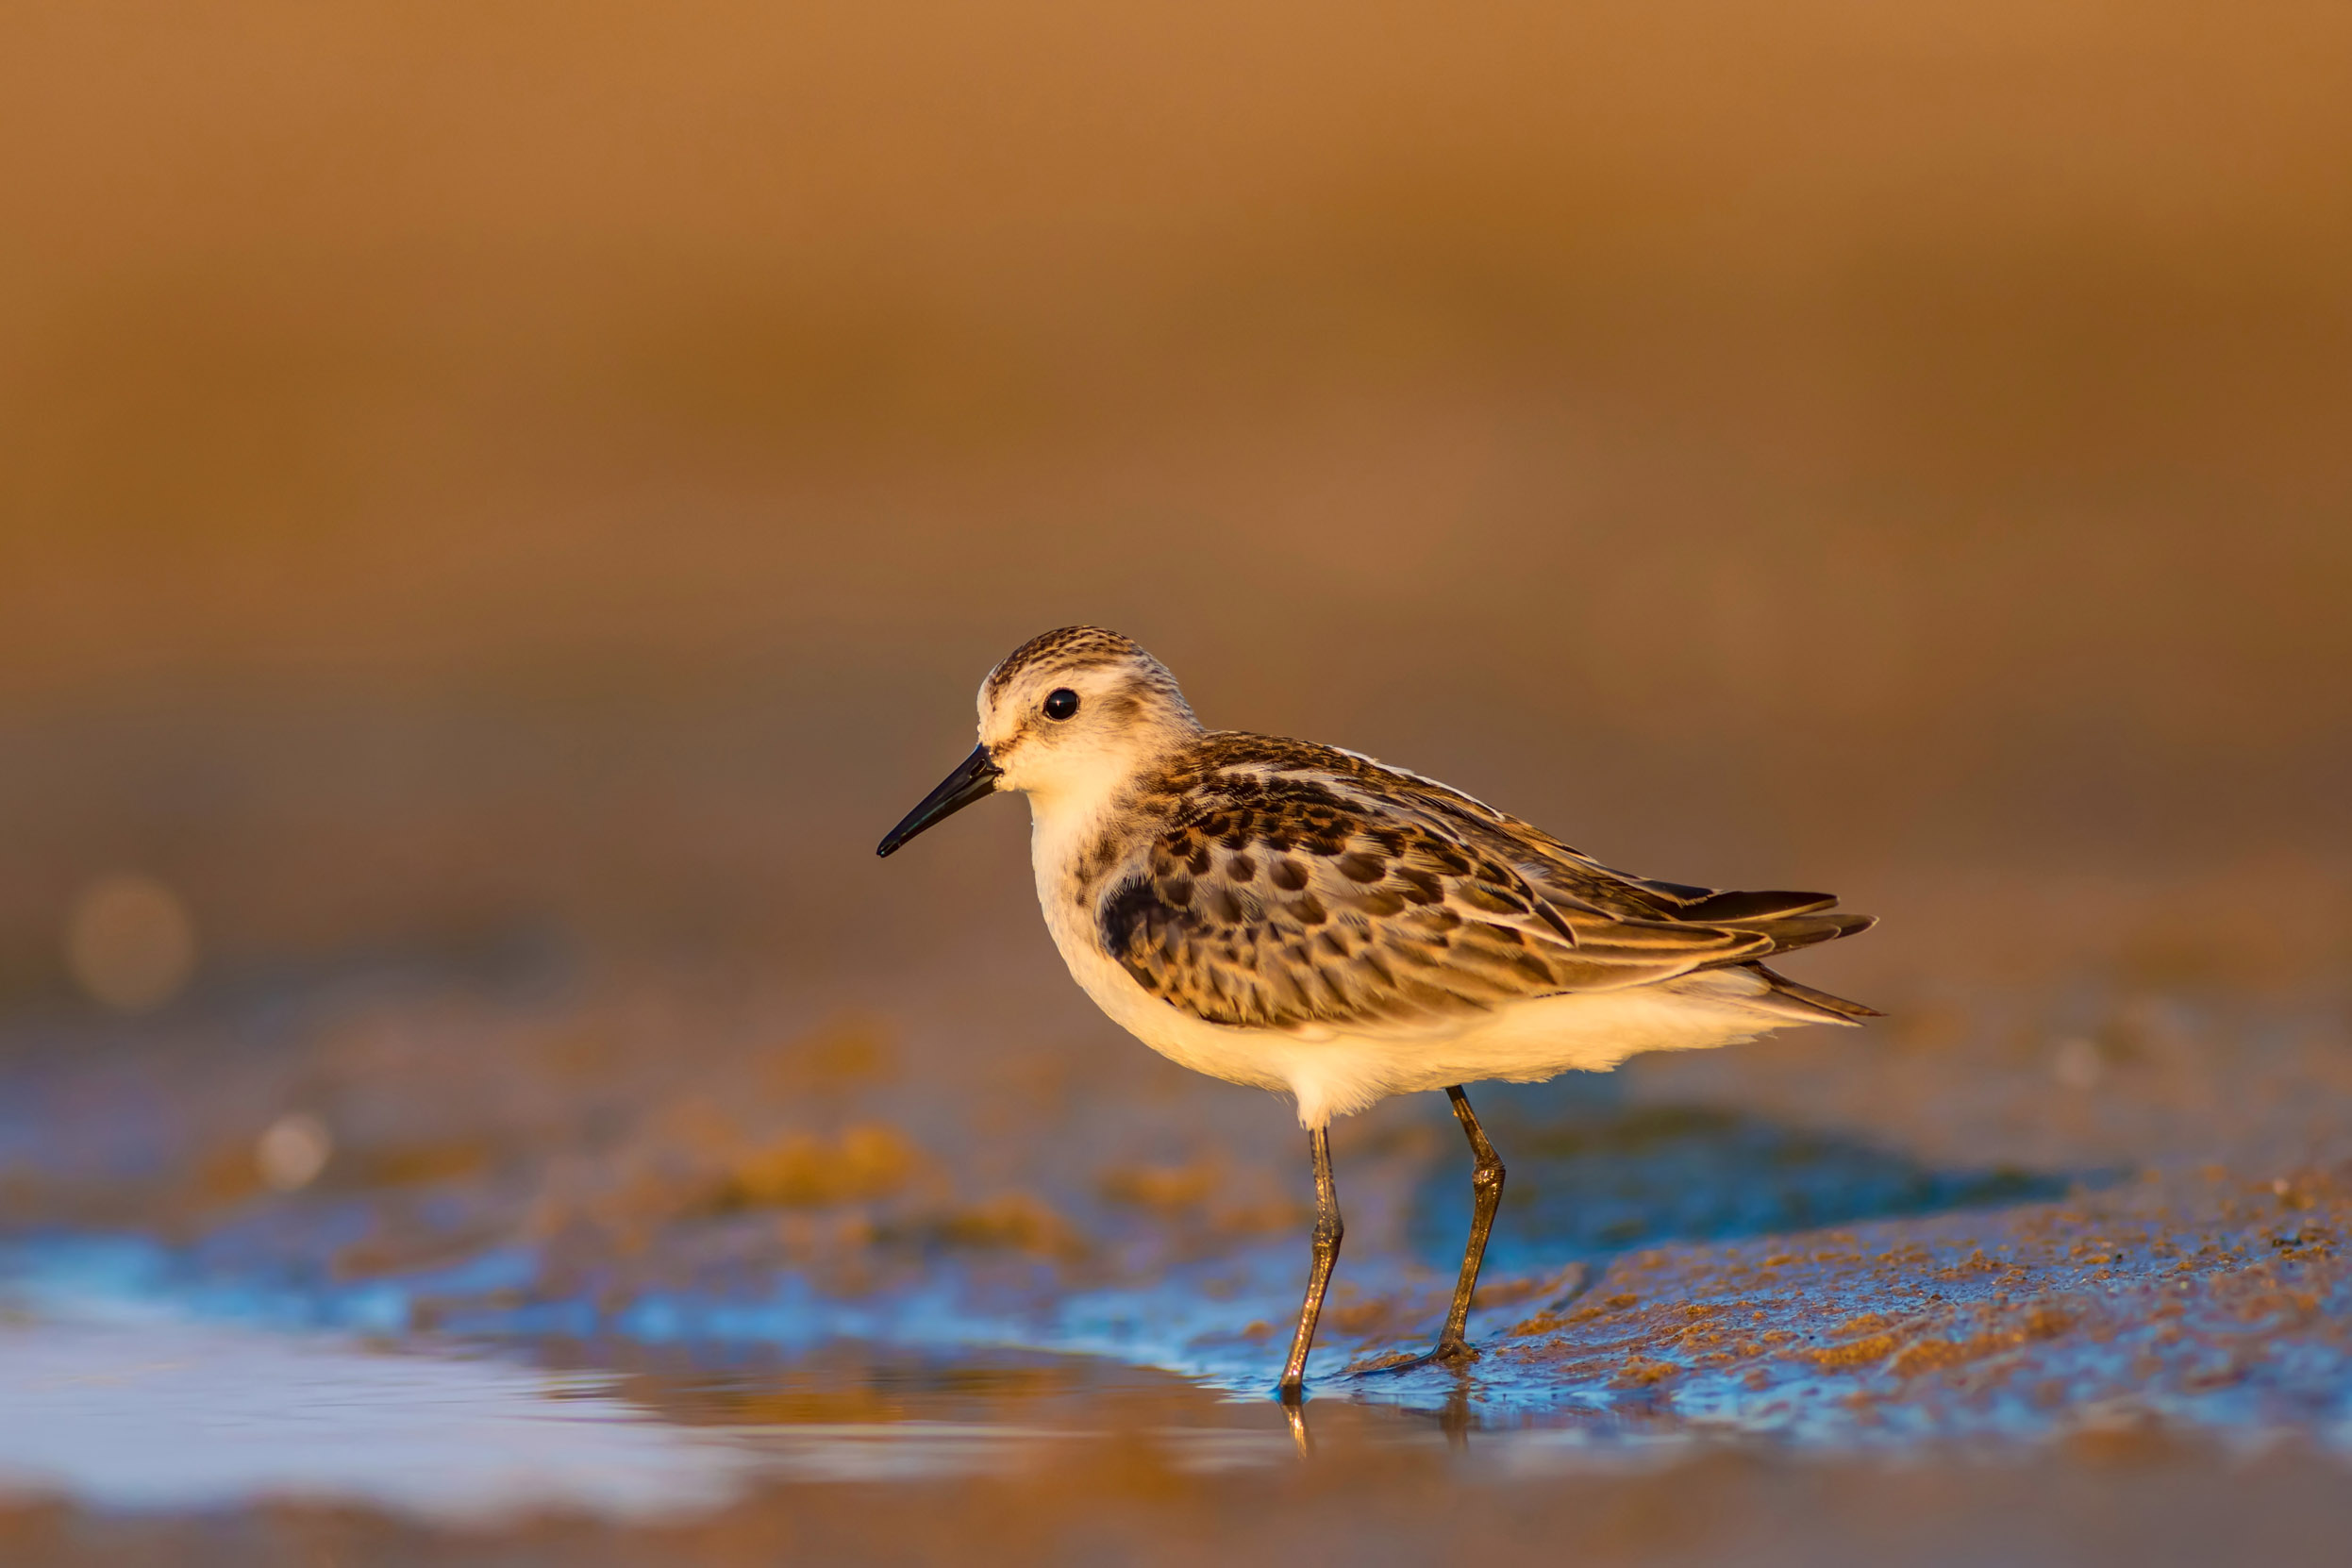 A lone Little Stint stood next to the shore at sunset.